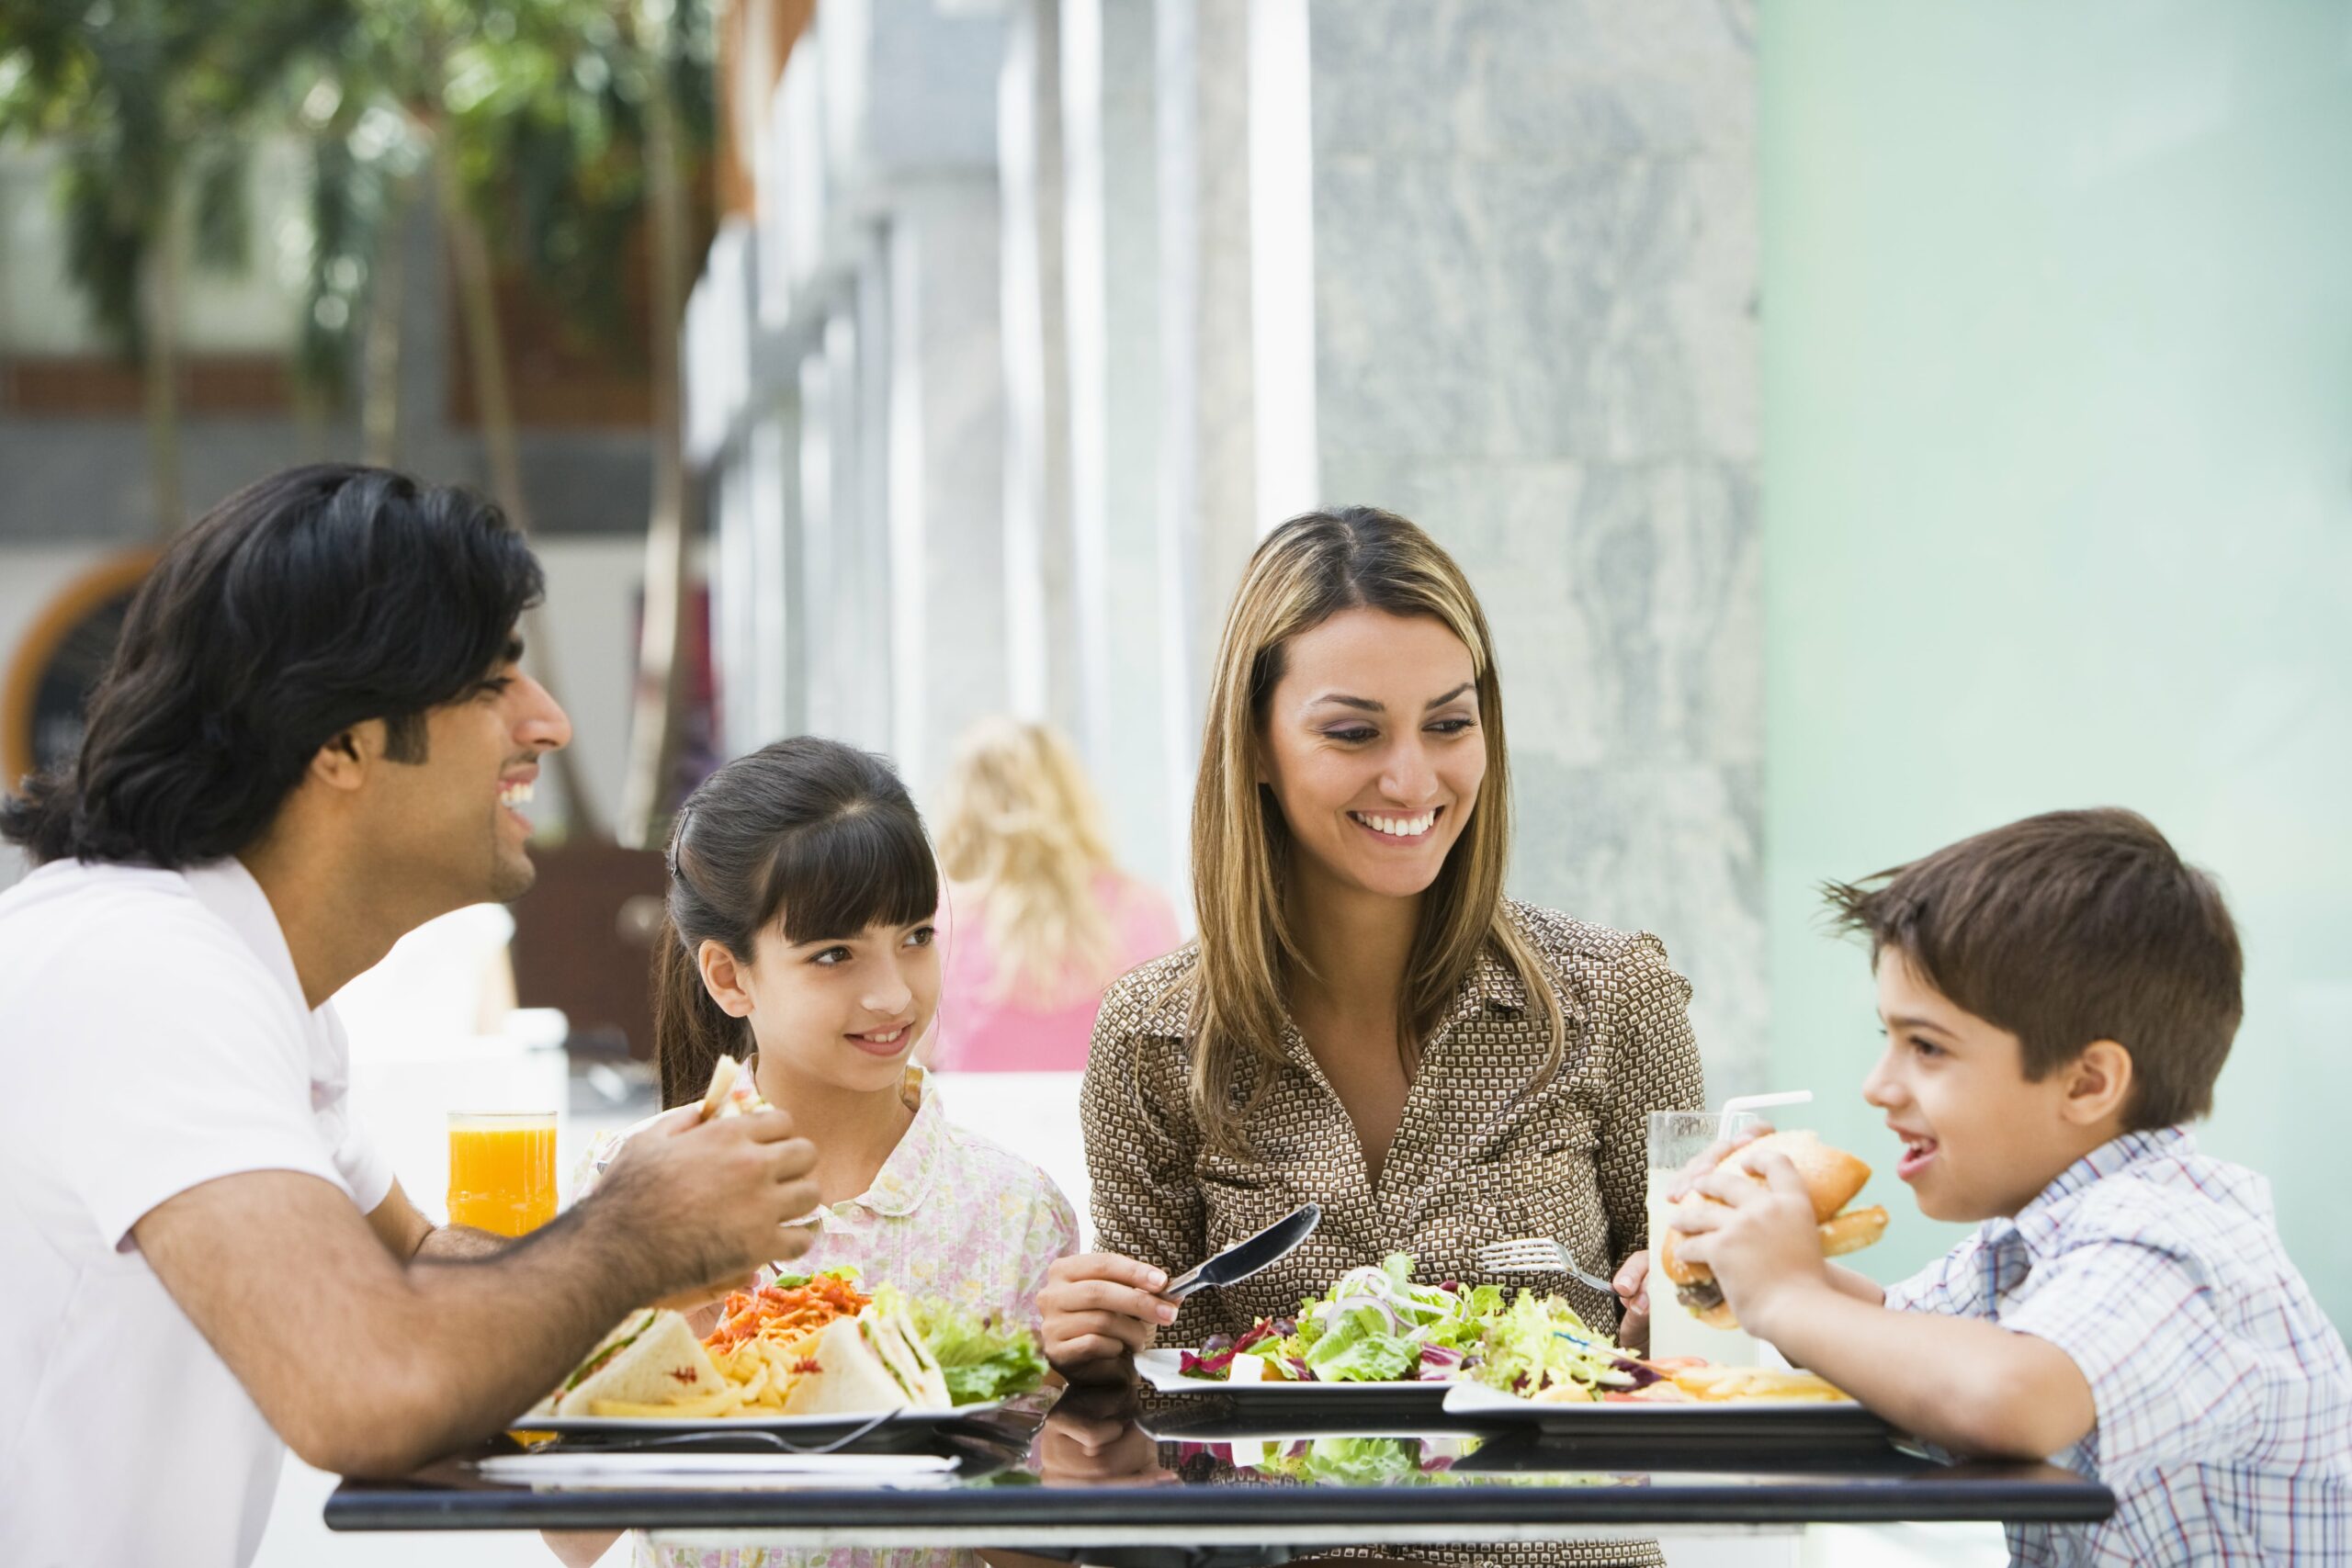 Family with two children enjoying an outdoor lunch at a restaurant